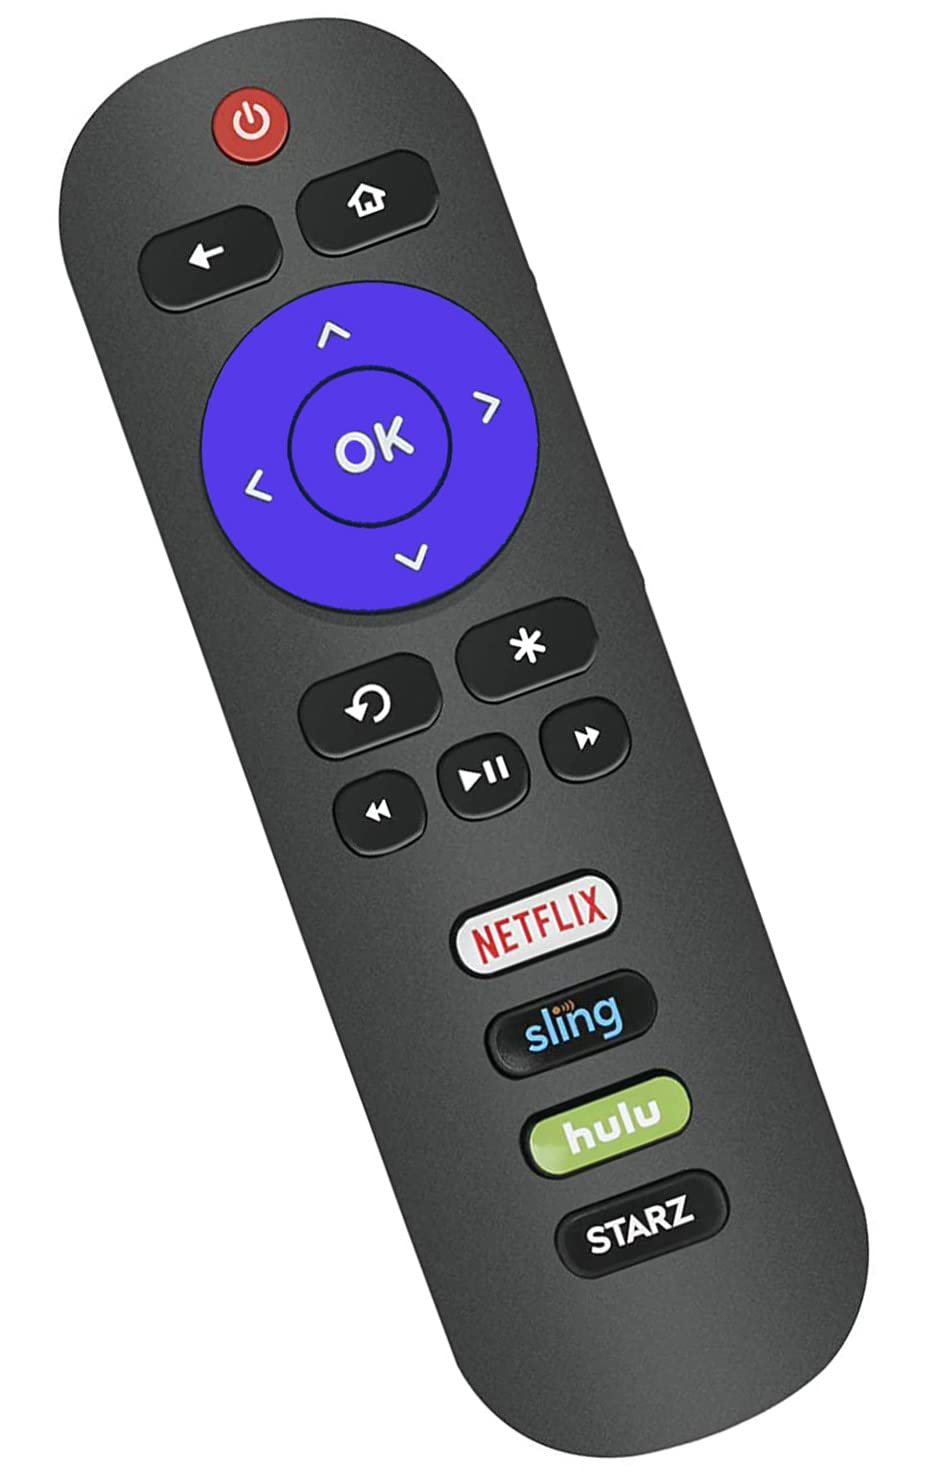 Remote Control Compatible for All TCL Roku TV Remote 32S305 32s325 49S405 49S403 43S303 55S403 32S301 50FS3800 32S3750 32S3800 32S4610R 32S3850A 32S3700 43FP110 55s405 55p605